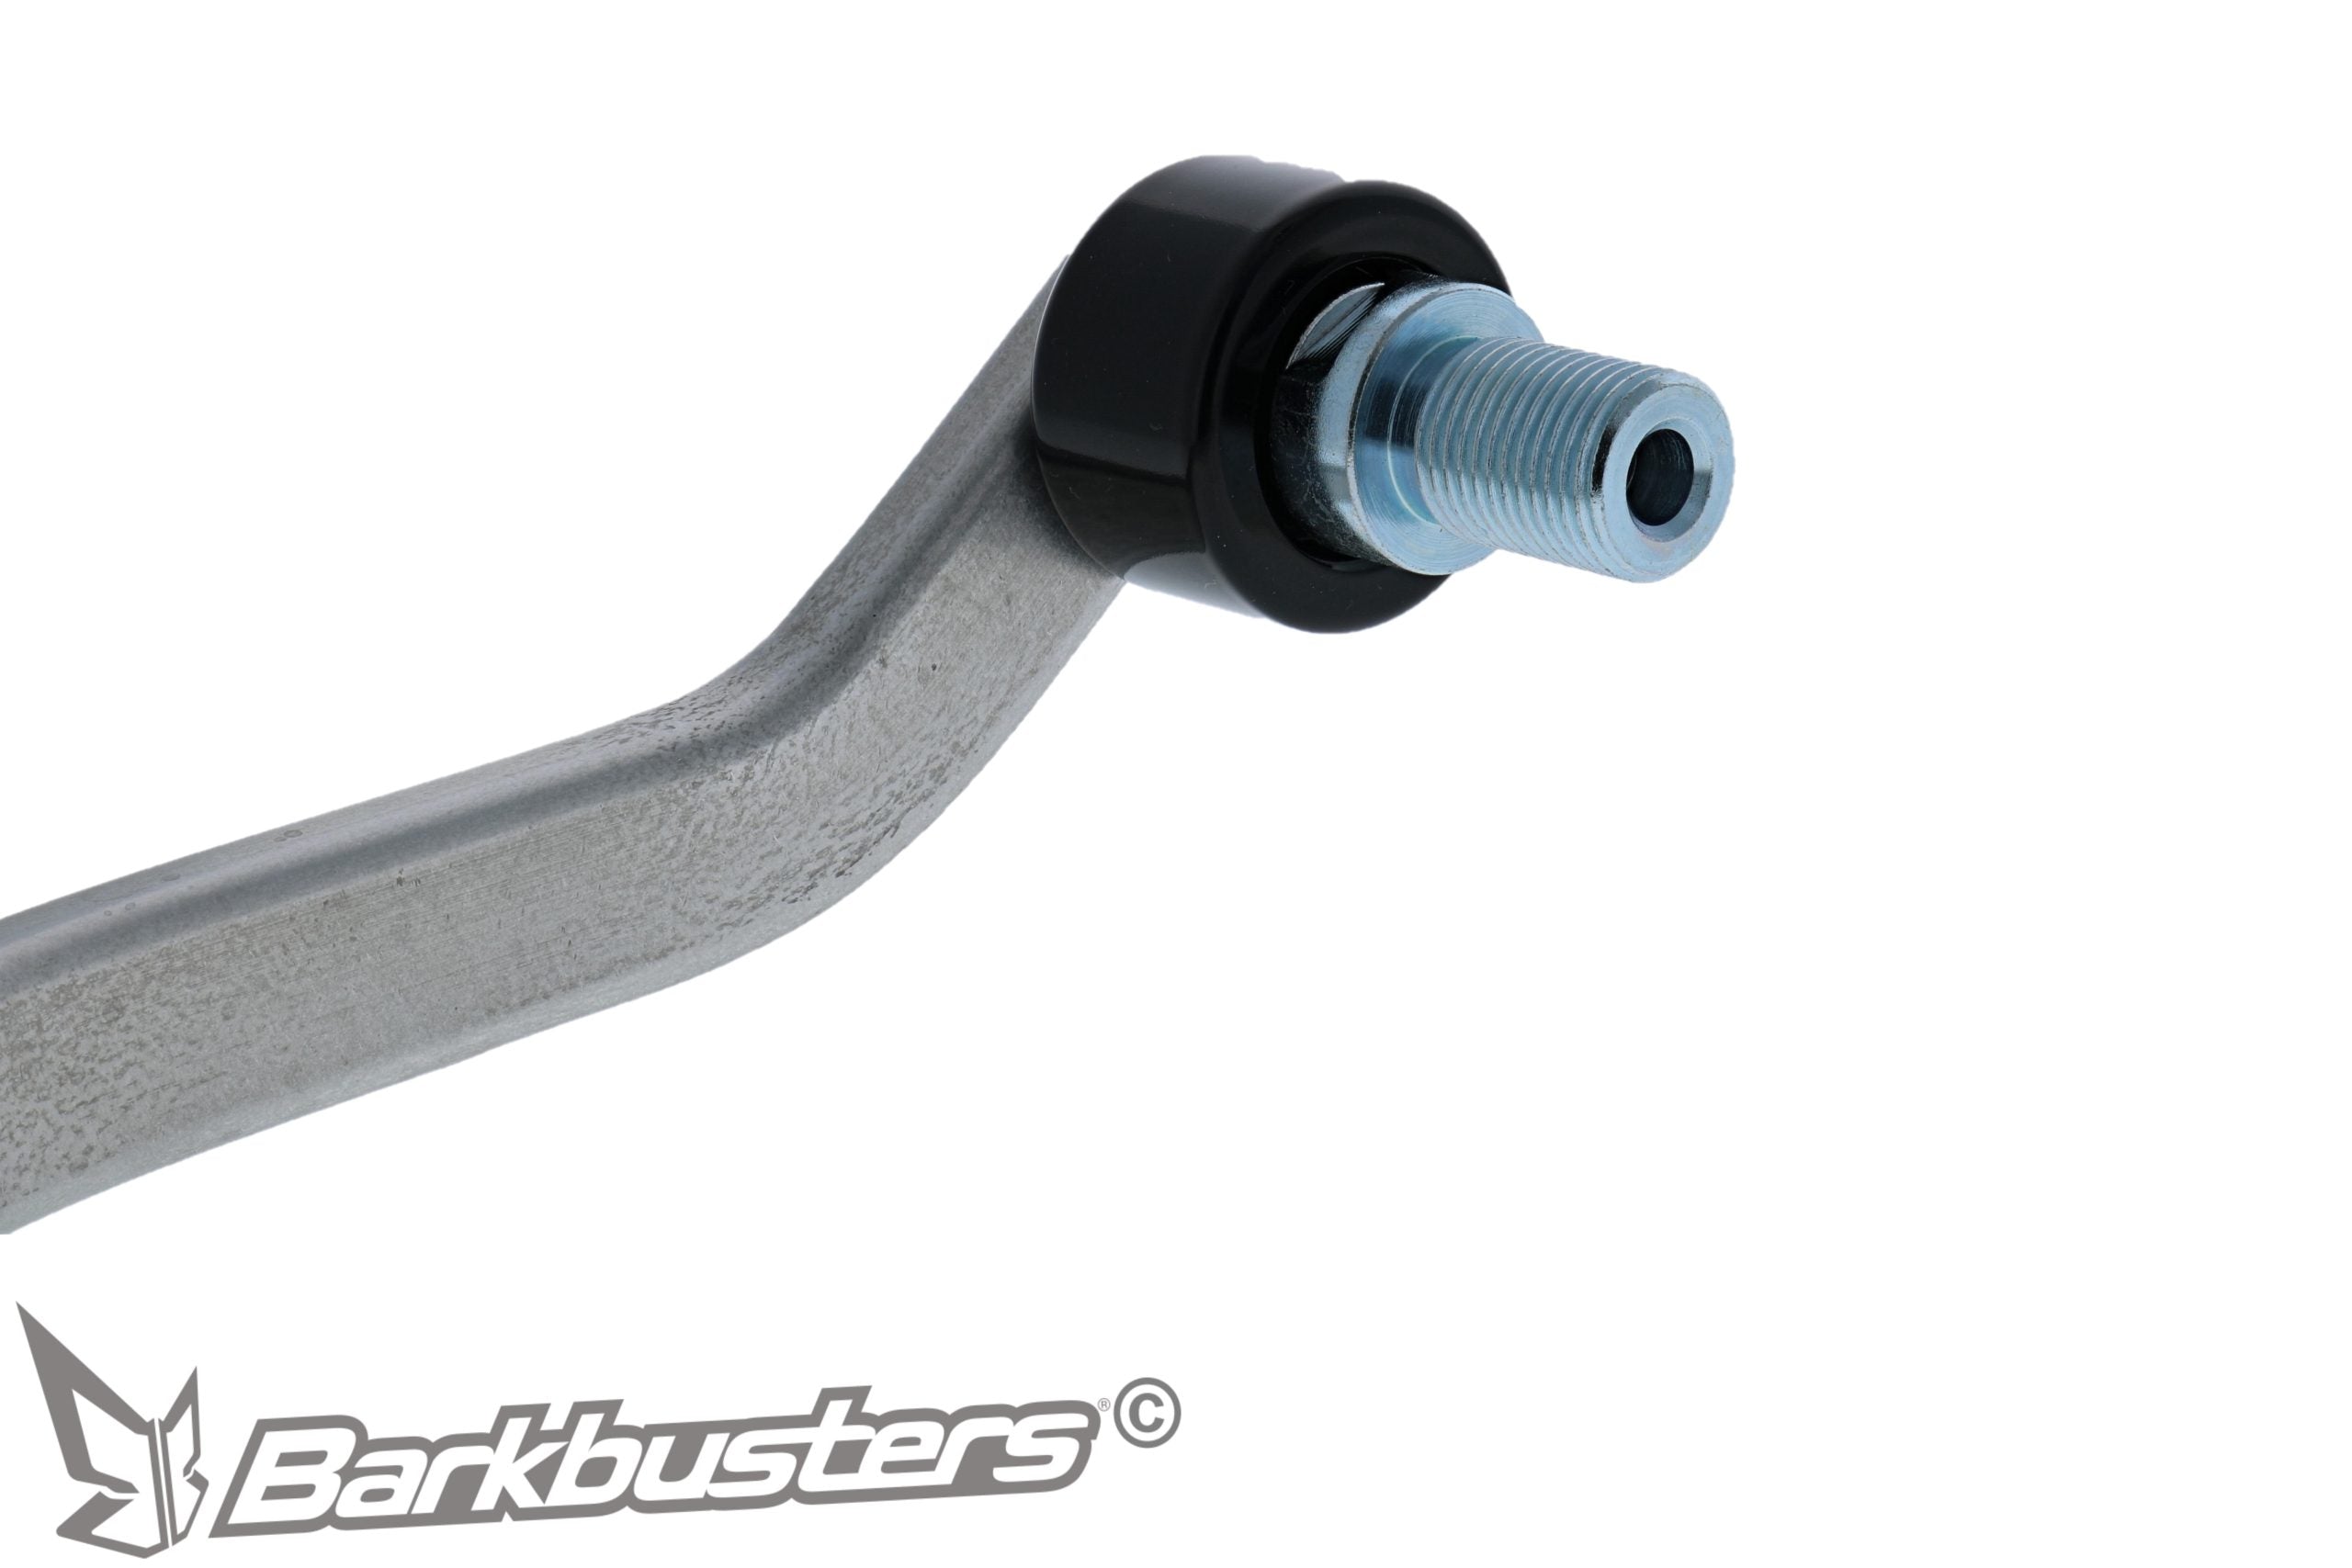 Barkbusters - Two Point Mount for Yamaha XTZ700 Tenere ('19 on)